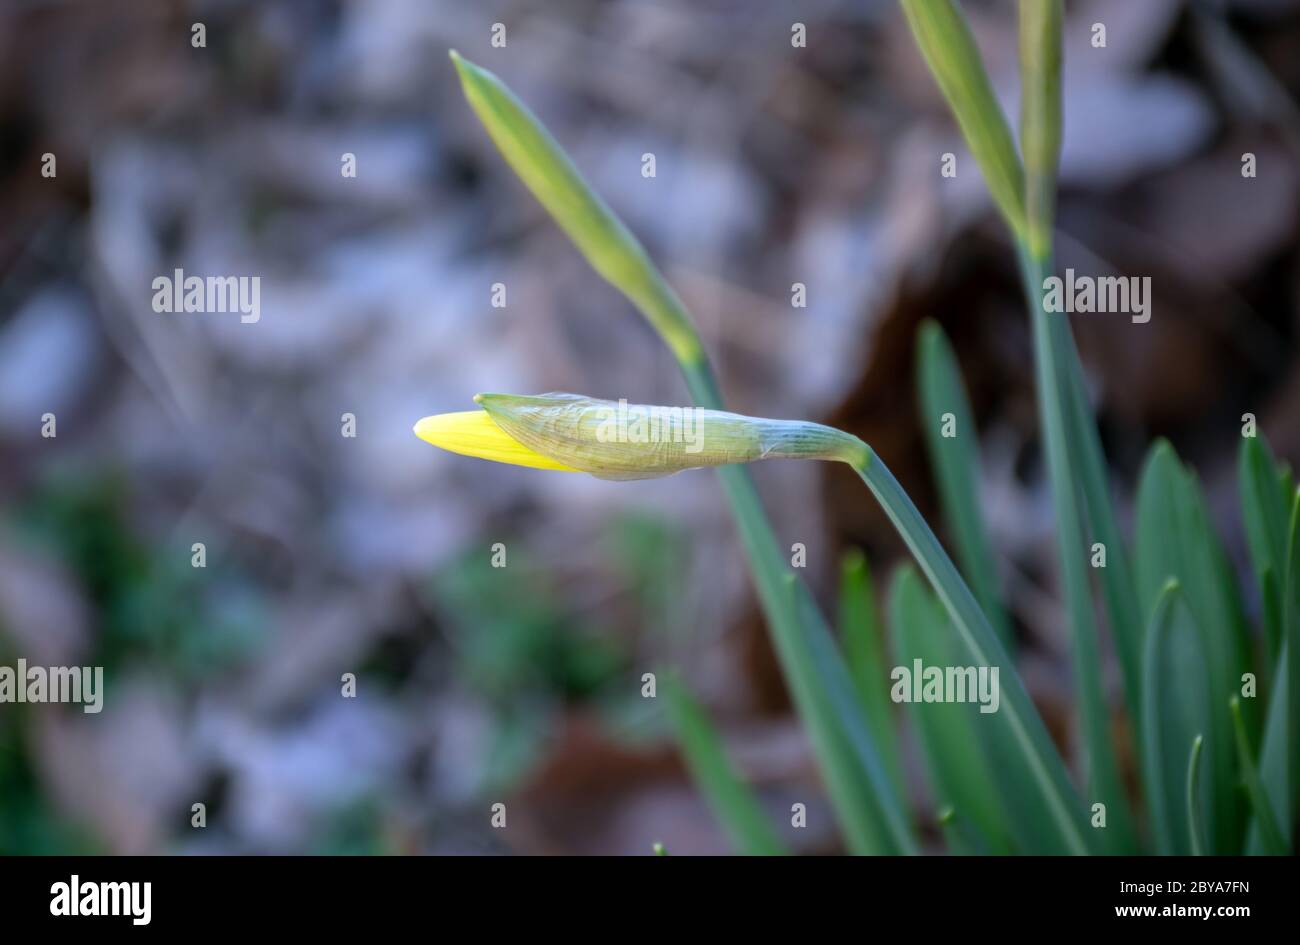 Spring is on the way in Misosuri and the yellow jonquil's are about to open up. They are sometimes called daffodil's. Bokeh effect. Stock Photo